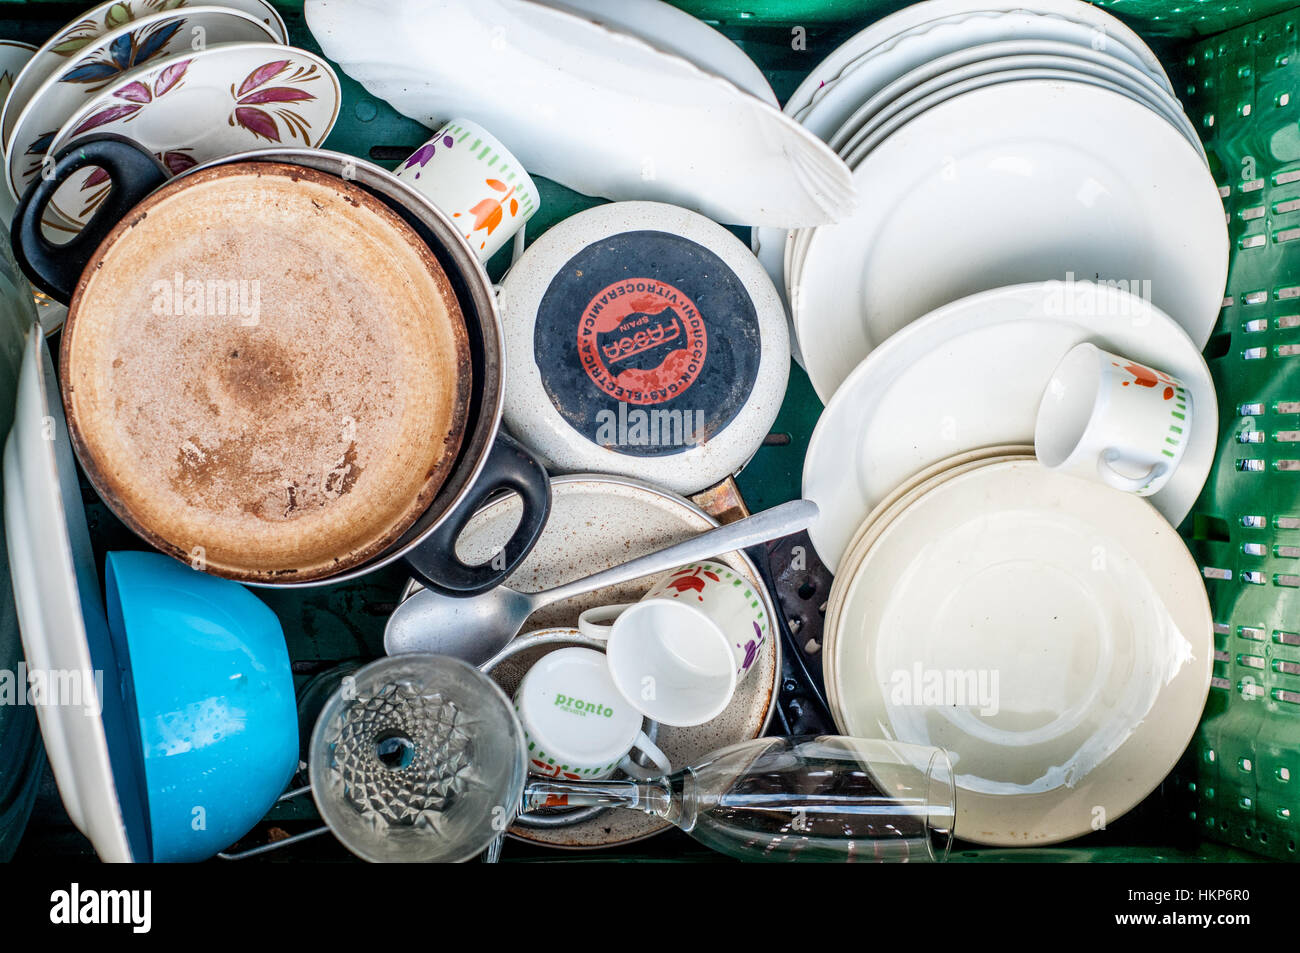 Old second-hand crockery to sell on the street Stock Photo